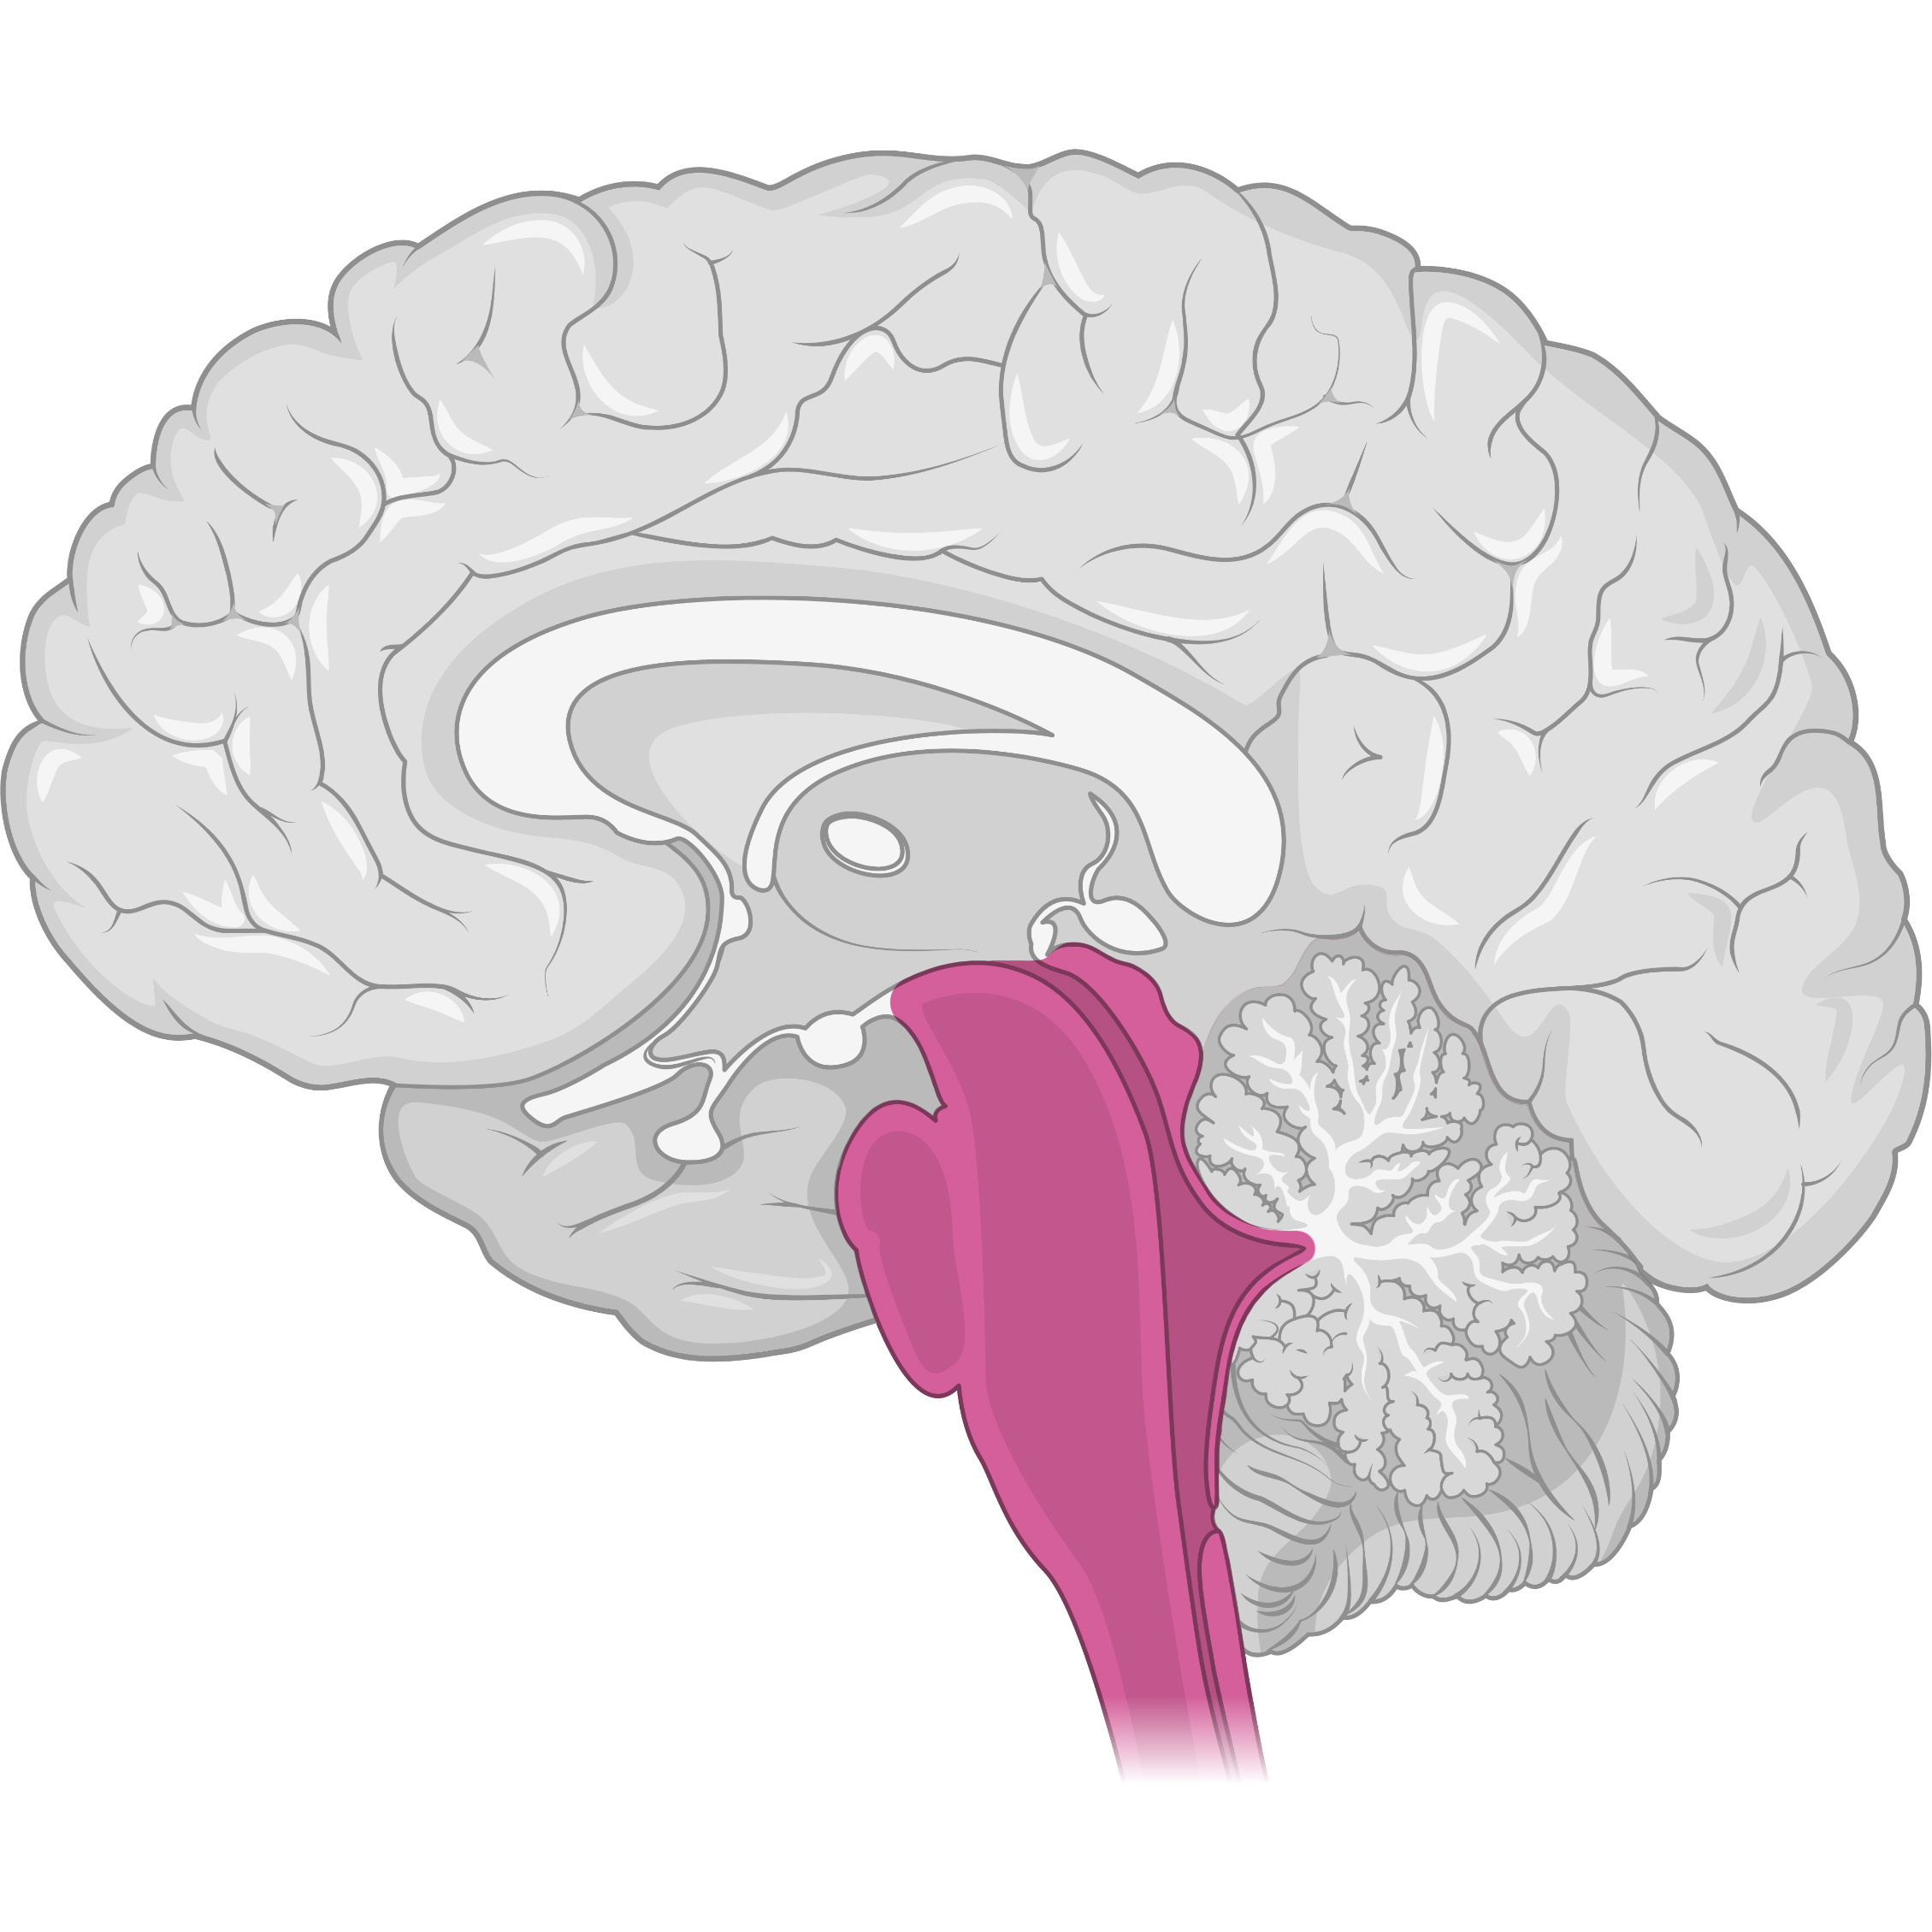 Grey brain (sagittal cut) with the pons highlighted in pink.